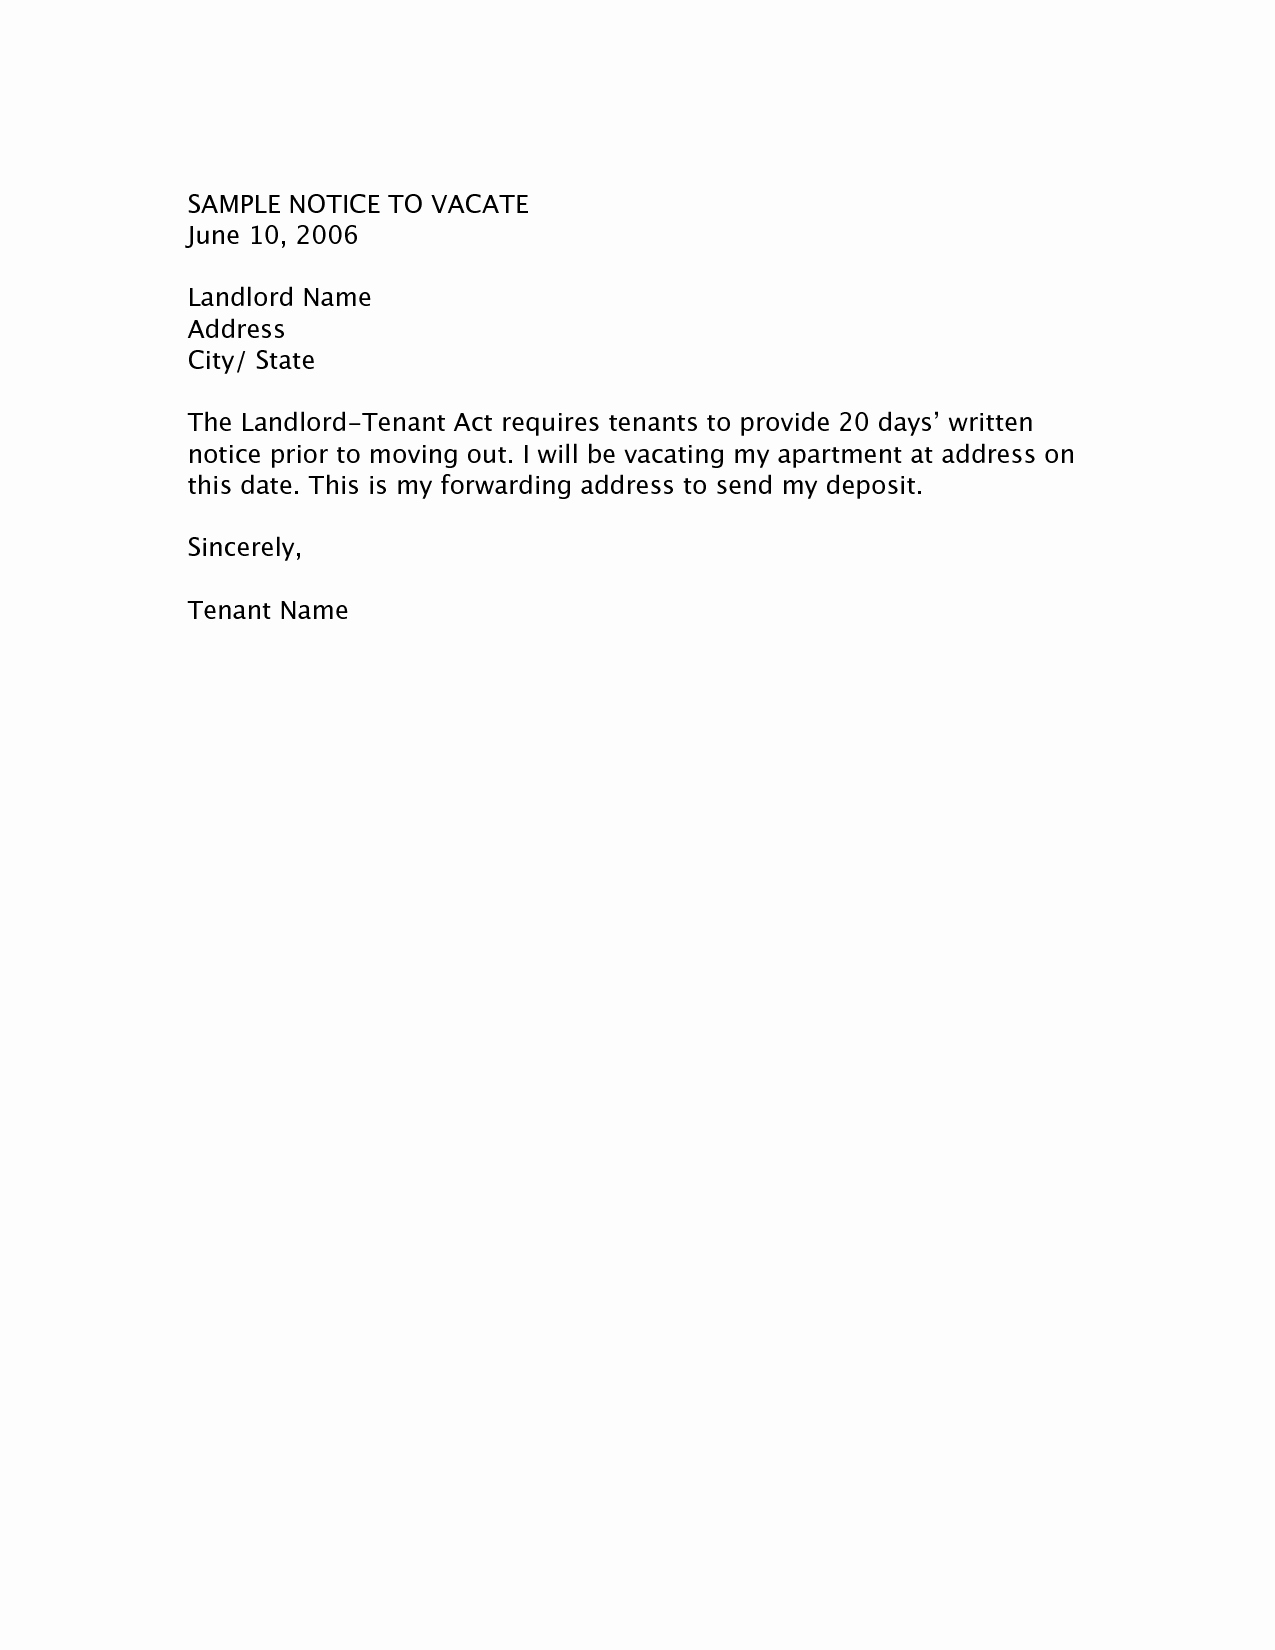 Sample Letter to Vacate Apartment Fresh Best S Of Intent to Move Out Template Sample